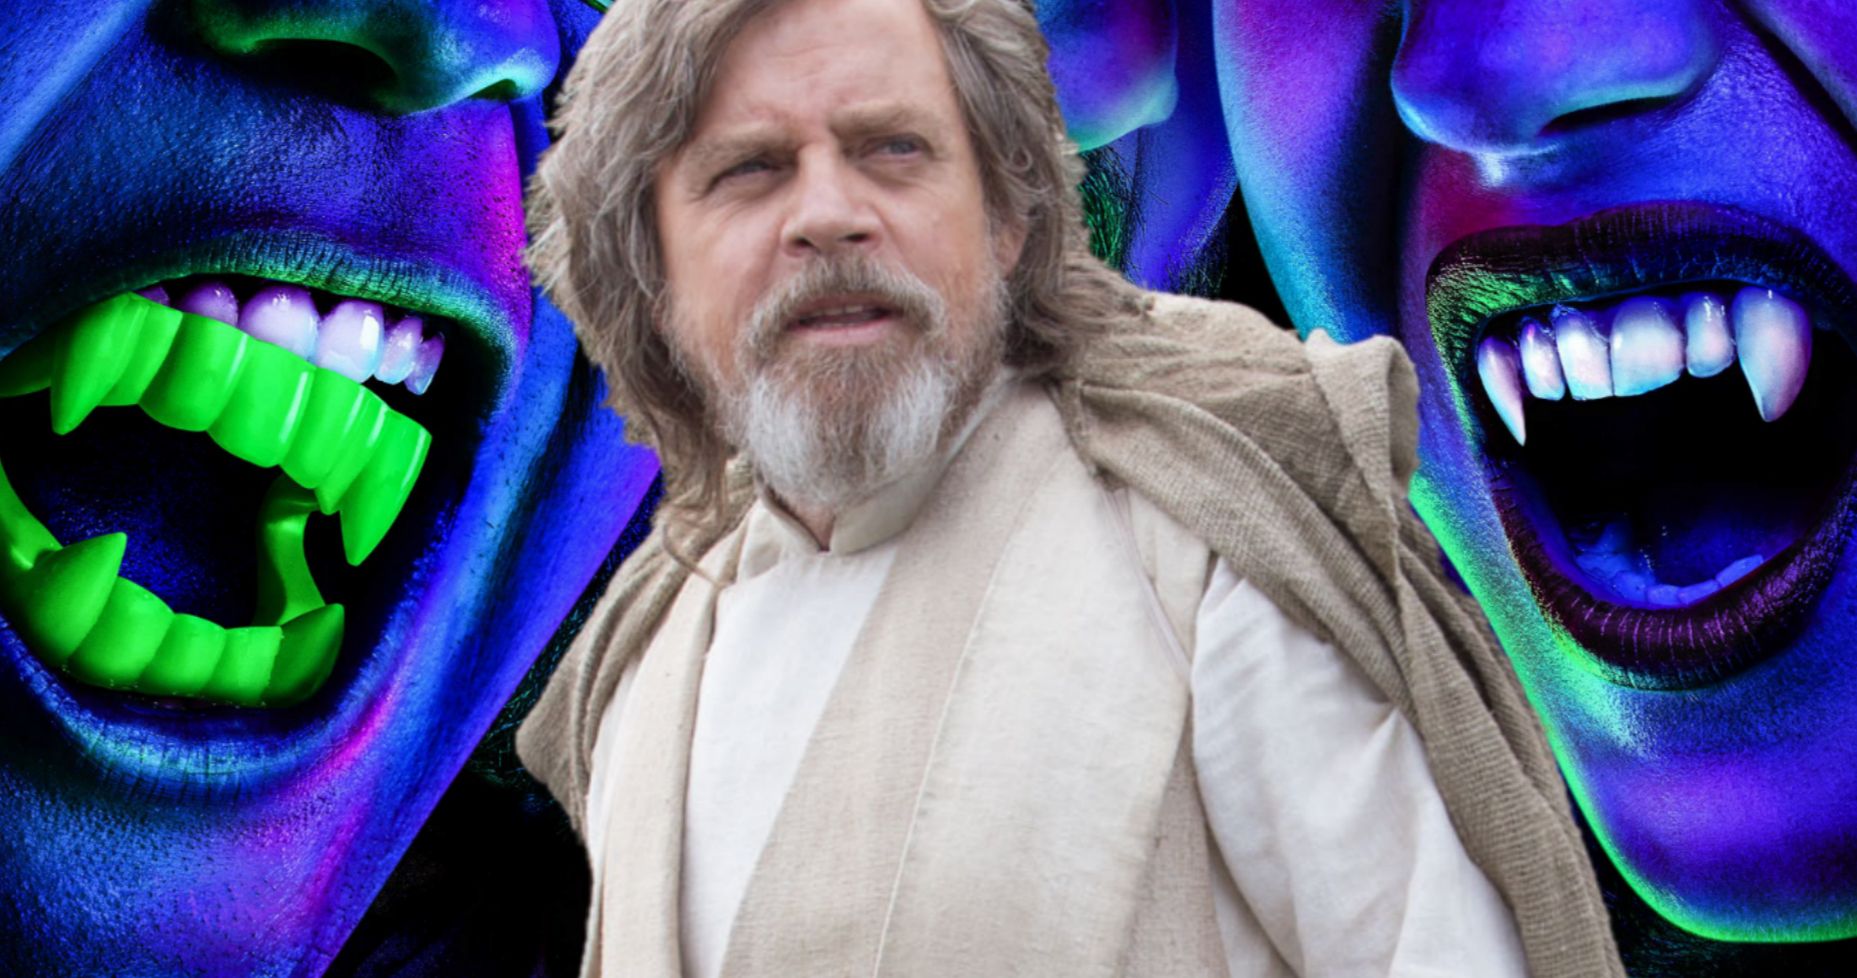 What We Do in the Shadows Season 2 Lures in Star Wars Legend Mark Hamill